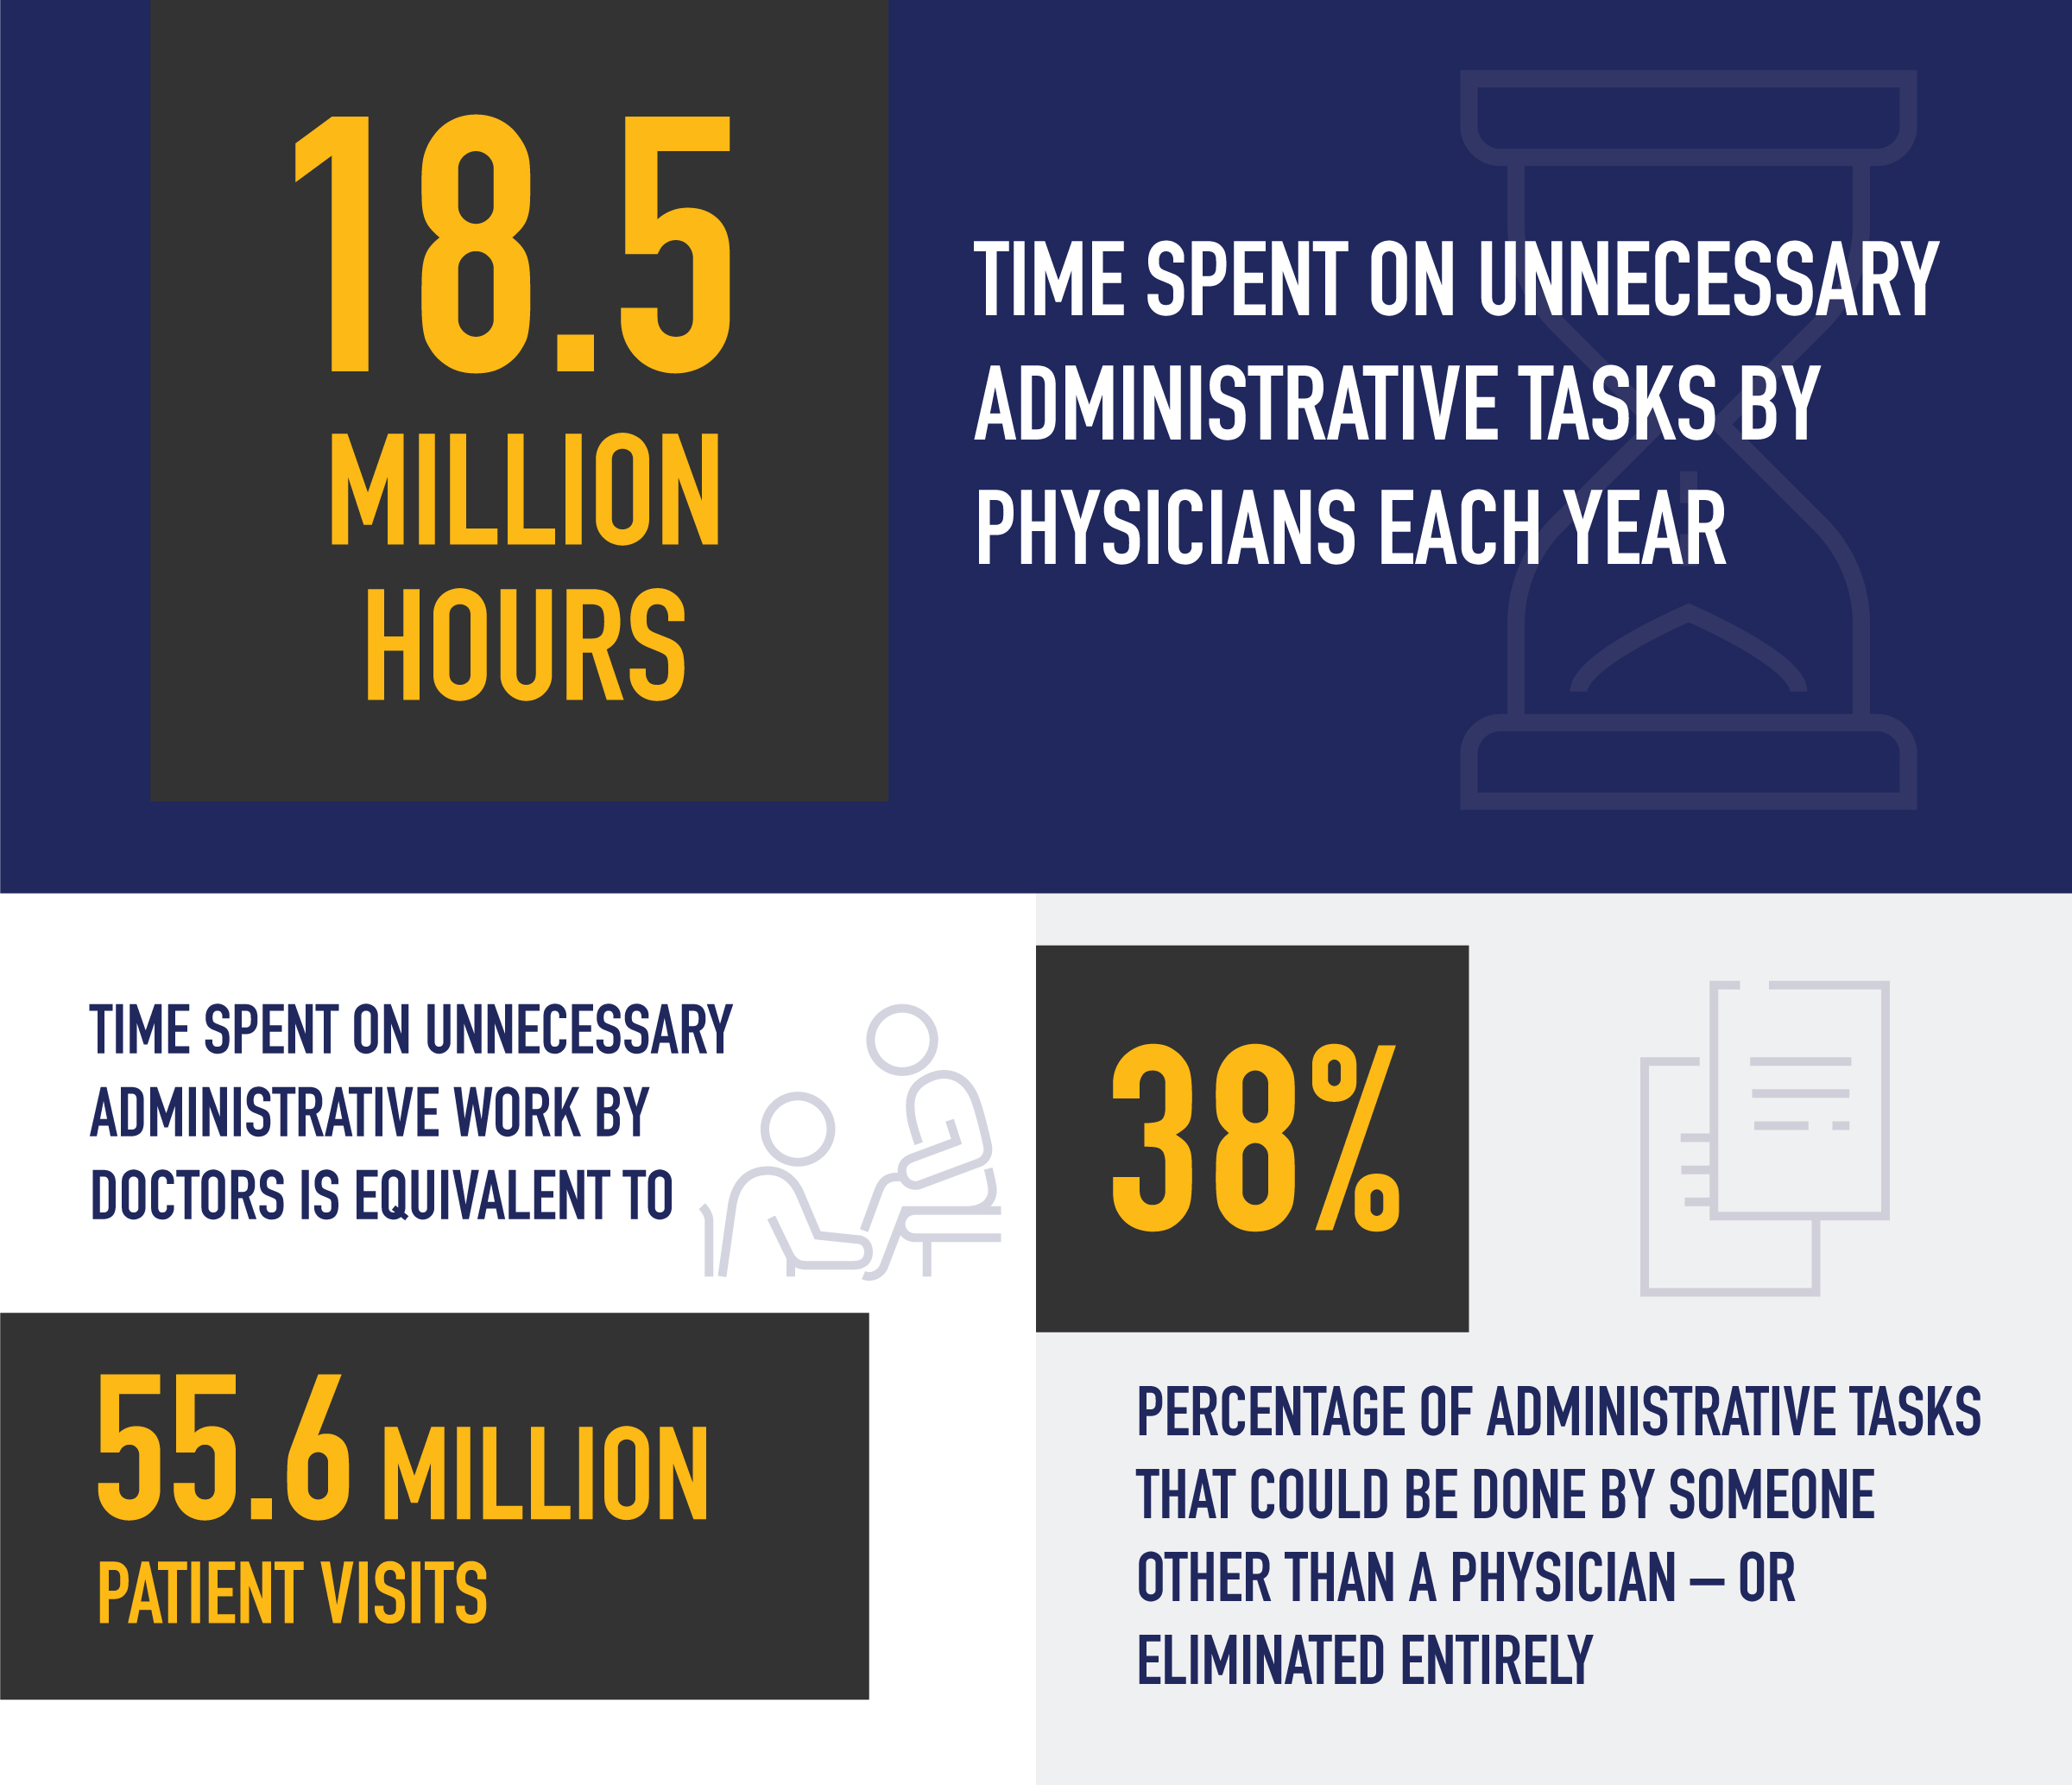 15.5 million hours spent on unnecessary administrative tasks by physicians each year. Time spent on unnecessary administrative work by doctors is equivalent to 55.6 million patient visits. 38% of administrative tasks that could be done by someone other than a physician.